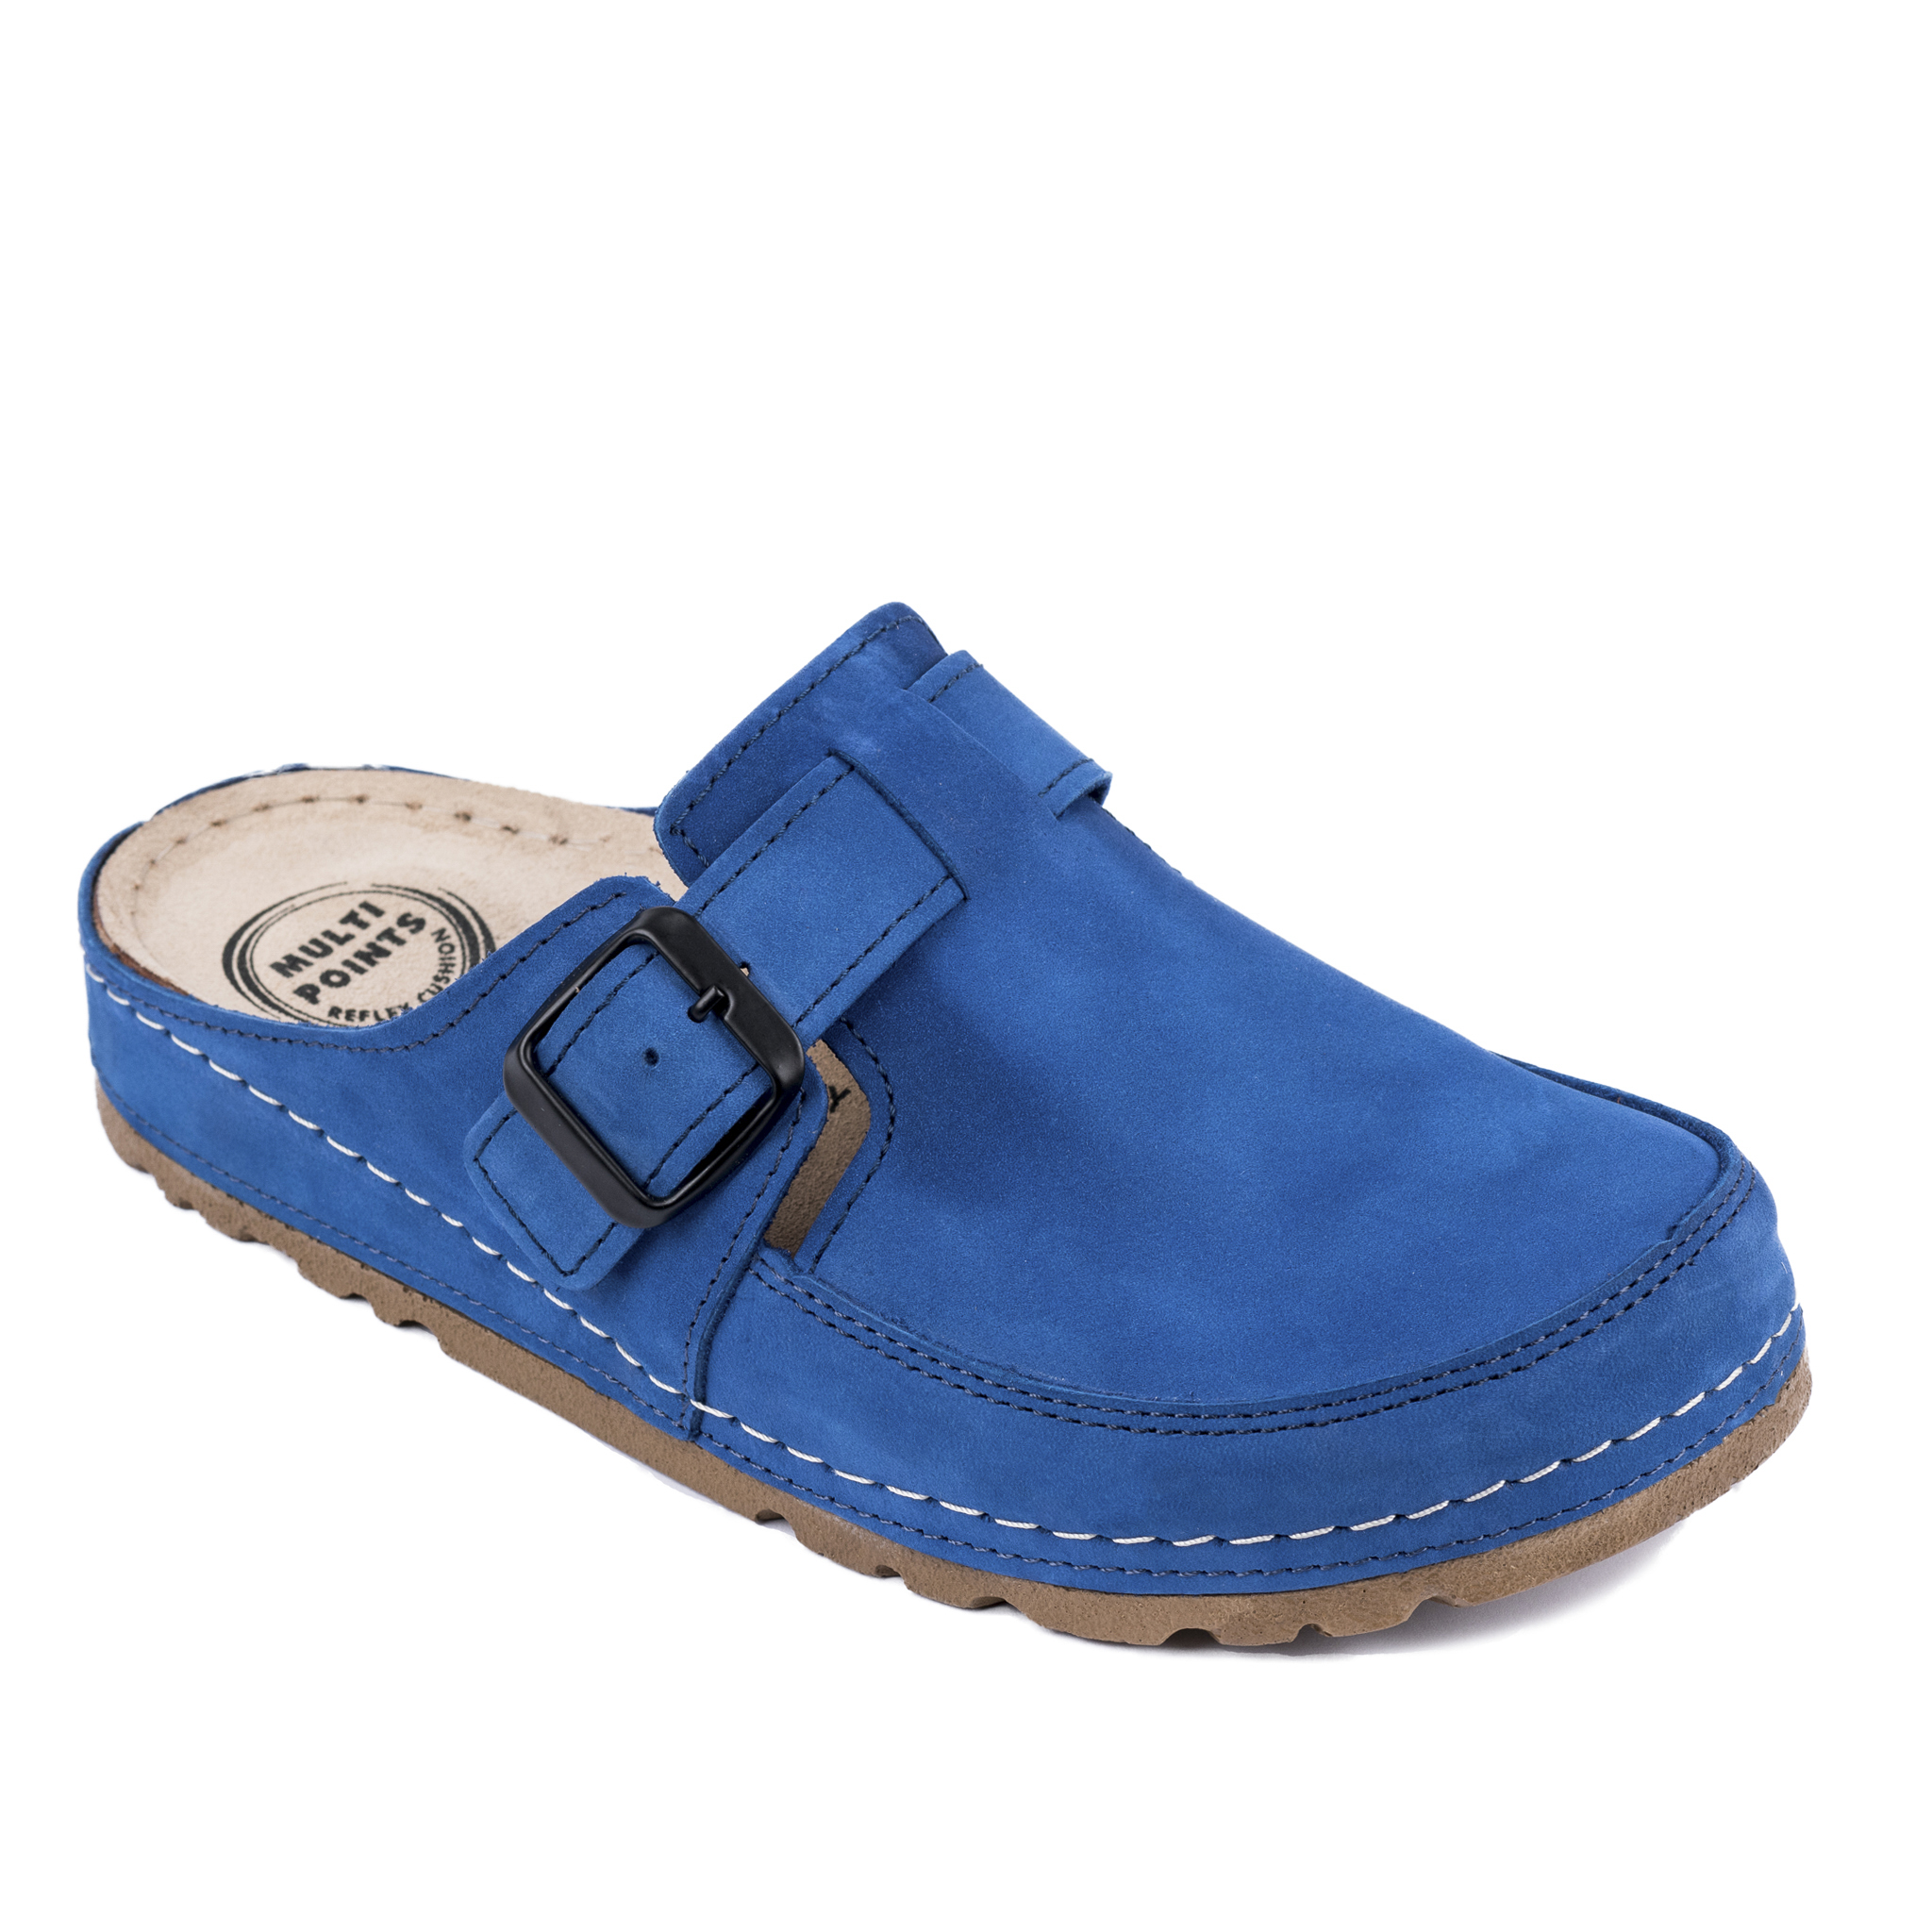 LEATHER CLOGS WITH BELT - BLUE